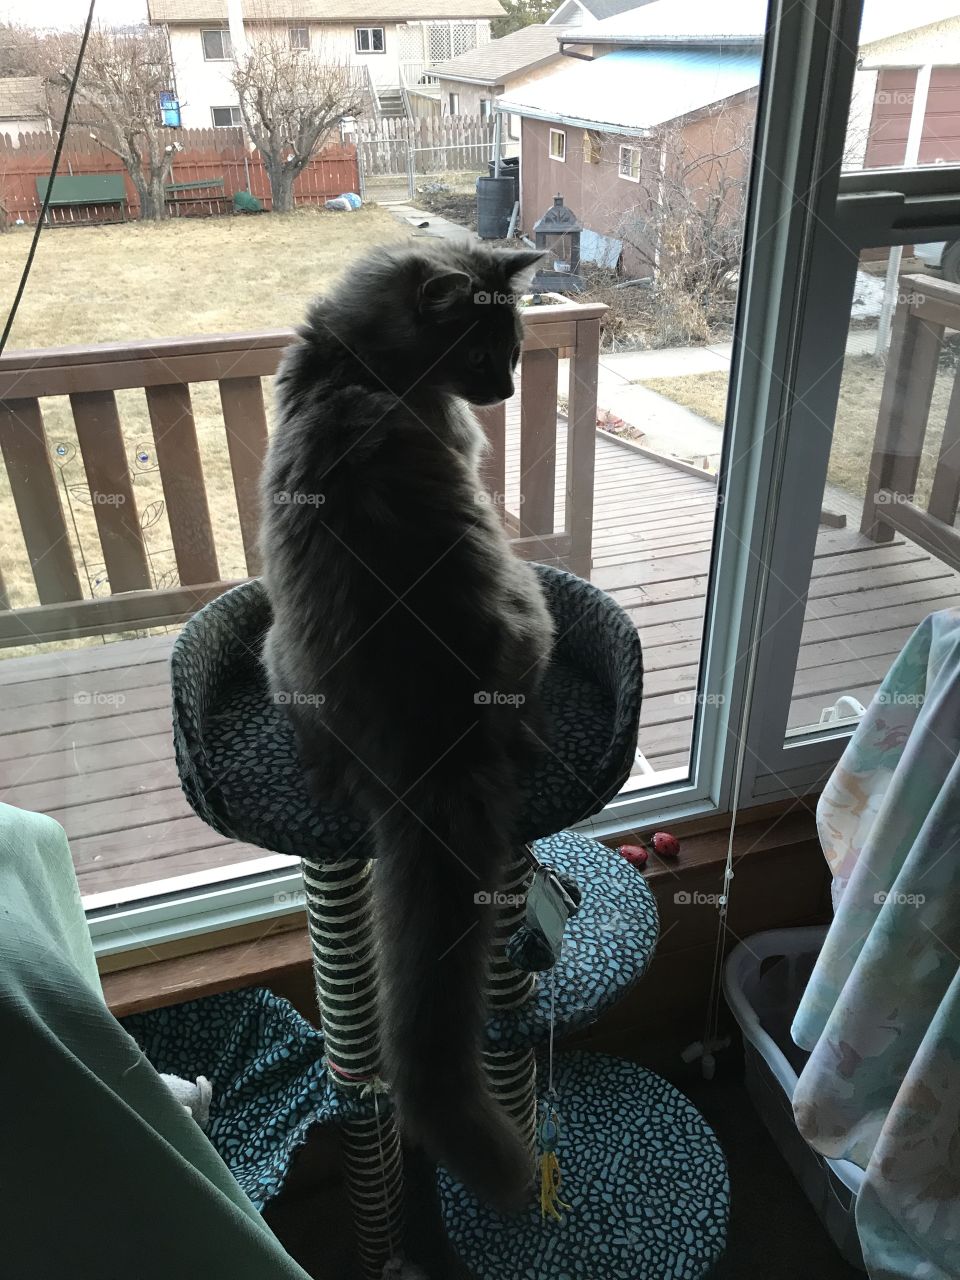 My parent’s cat sitting on top of her perch.